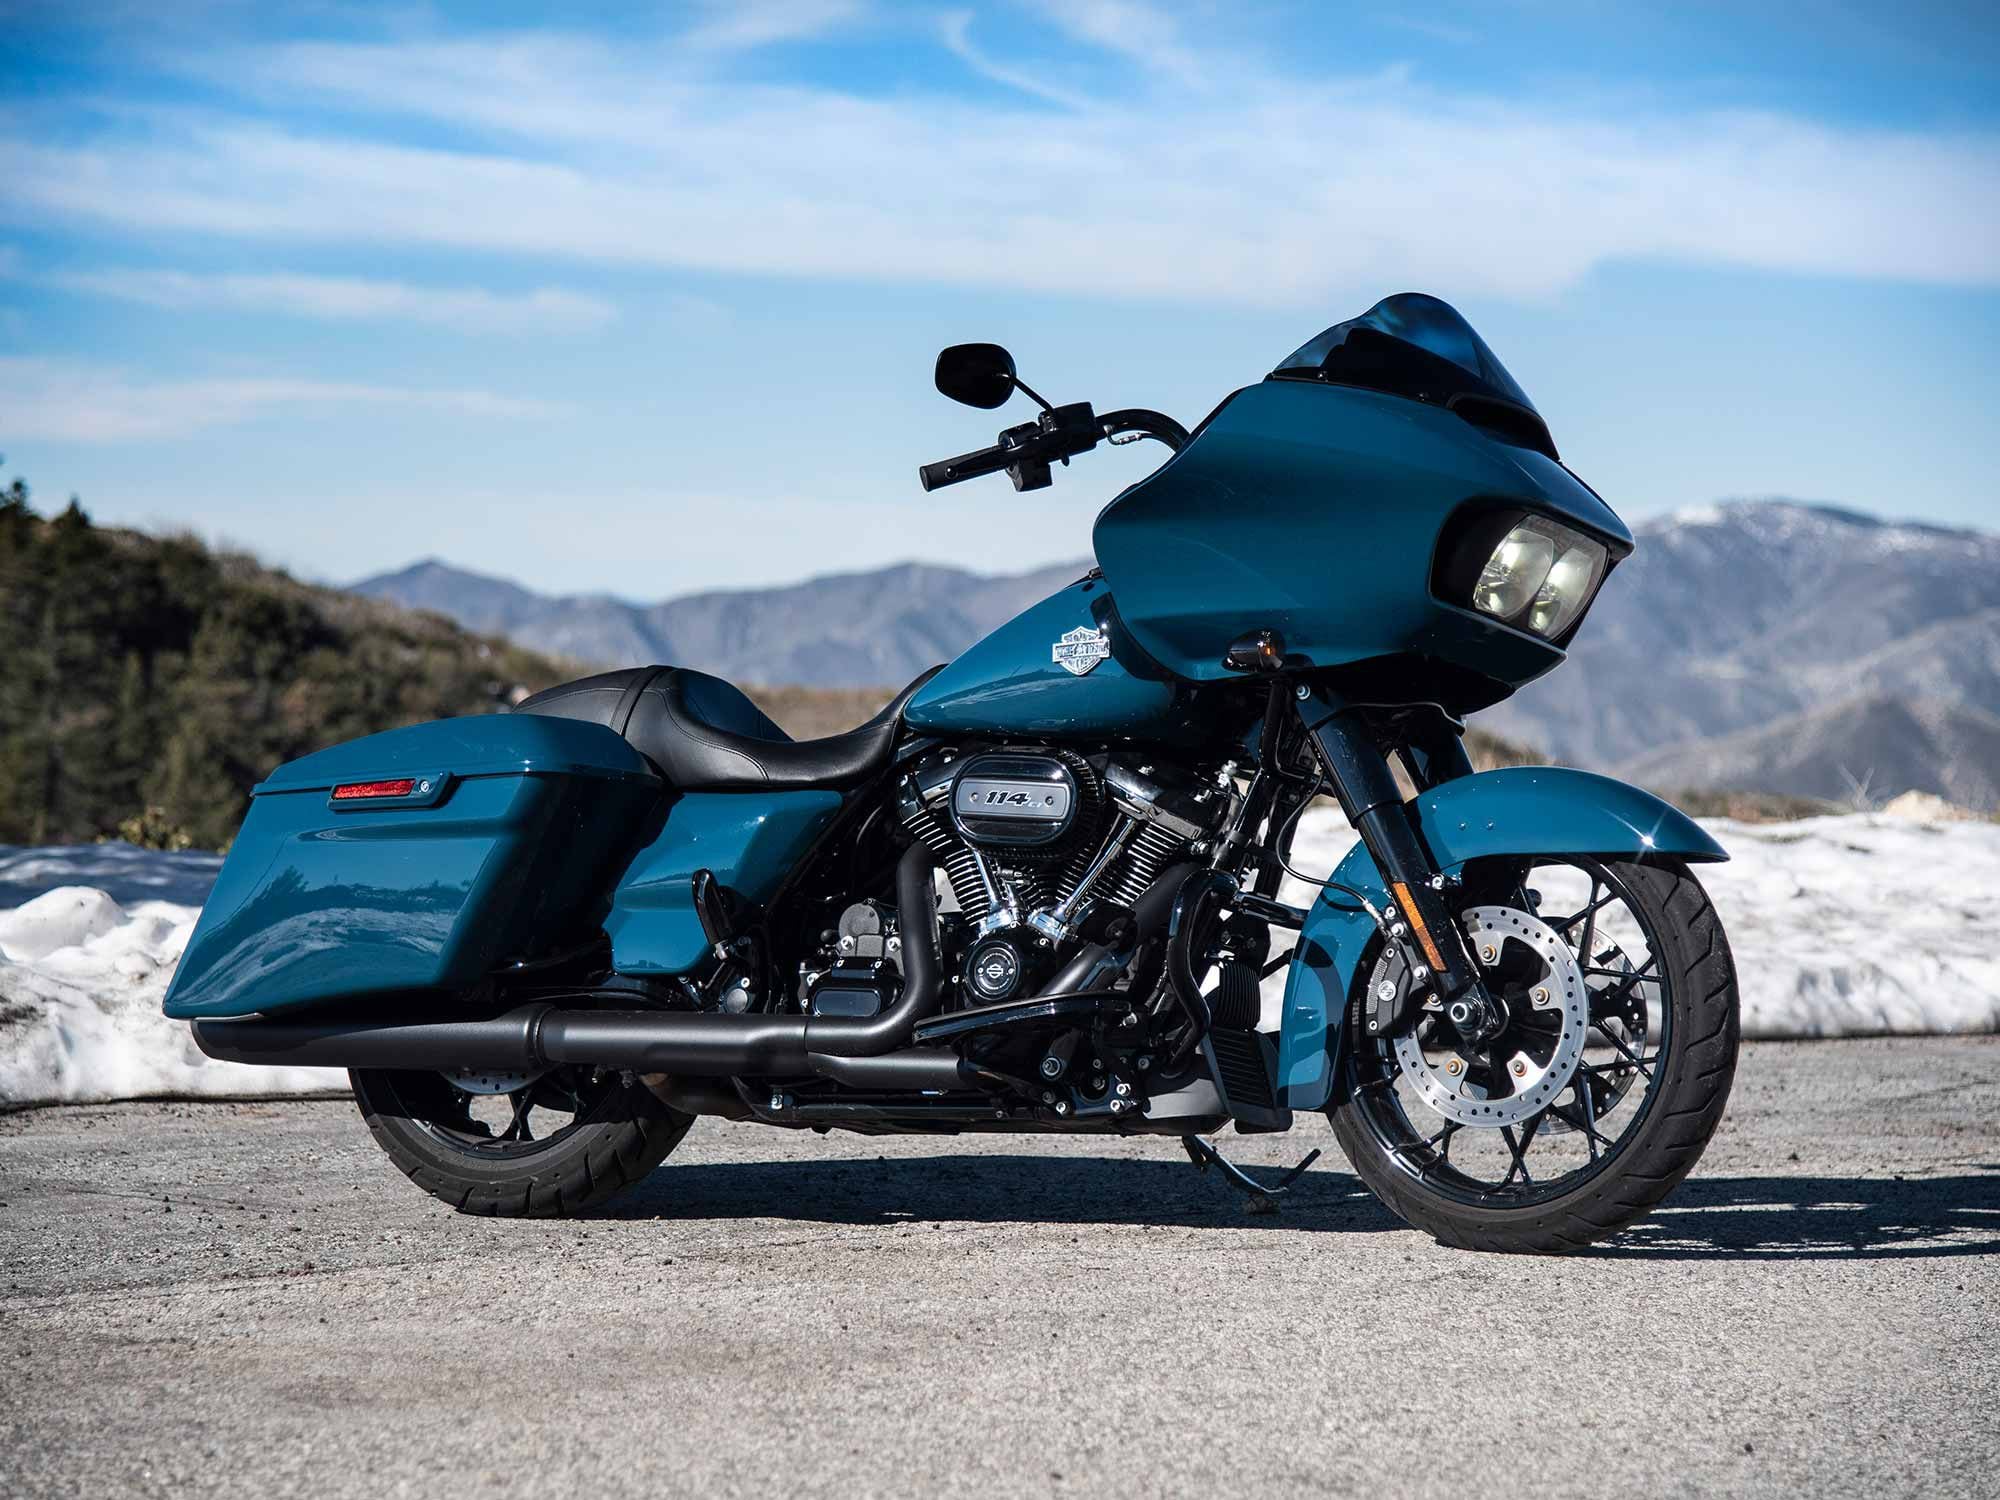 You wouldn’t know it from its outward appearance, but the Road Glide’s optional RDRS safety package makes slick surfaces like these mountain roads more approachable.